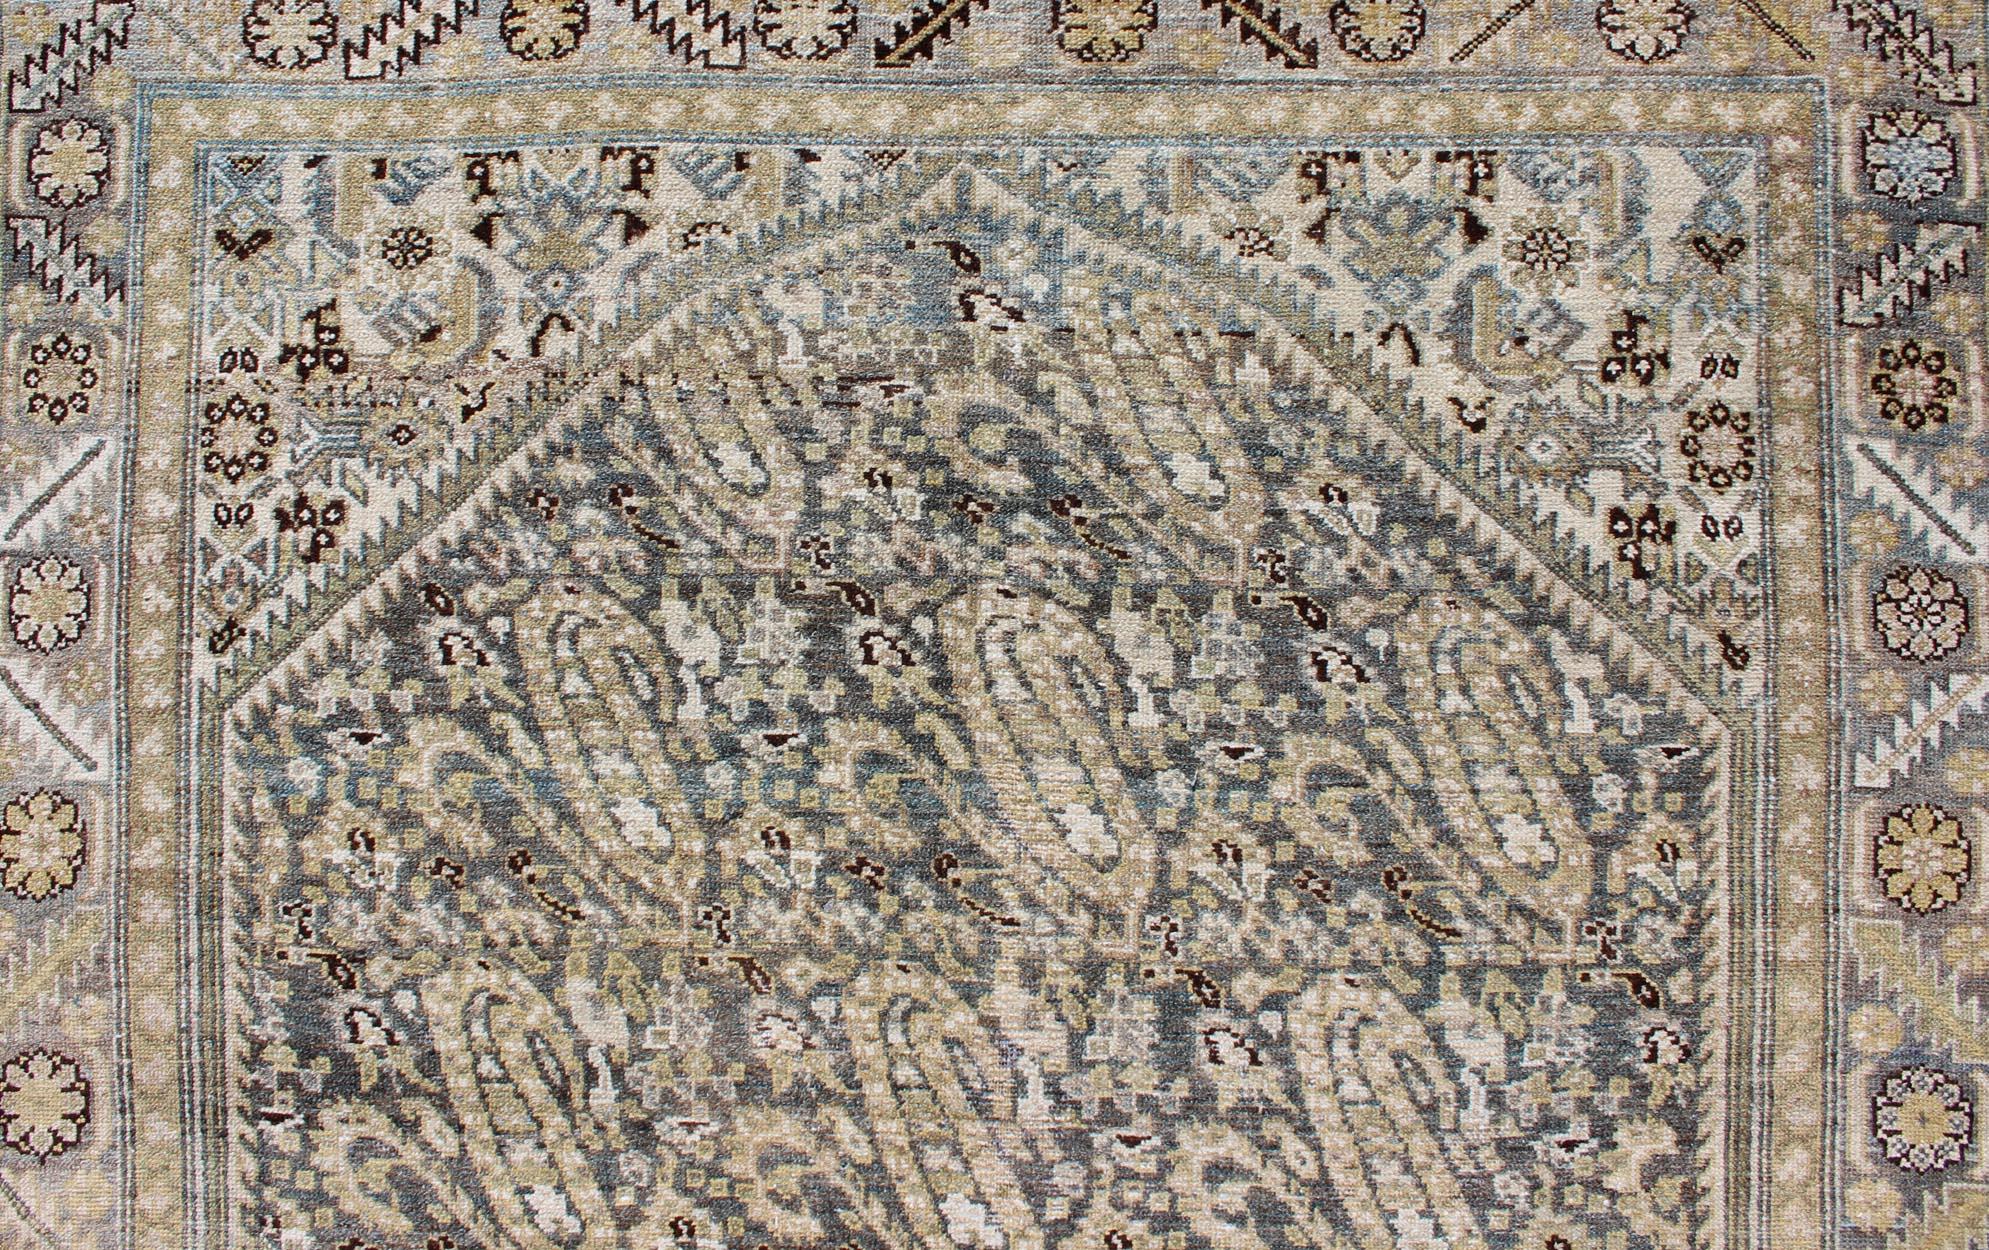 Gray and Earth Tones Paisley Design Gallery Malayer Rug with Paisley Design 3